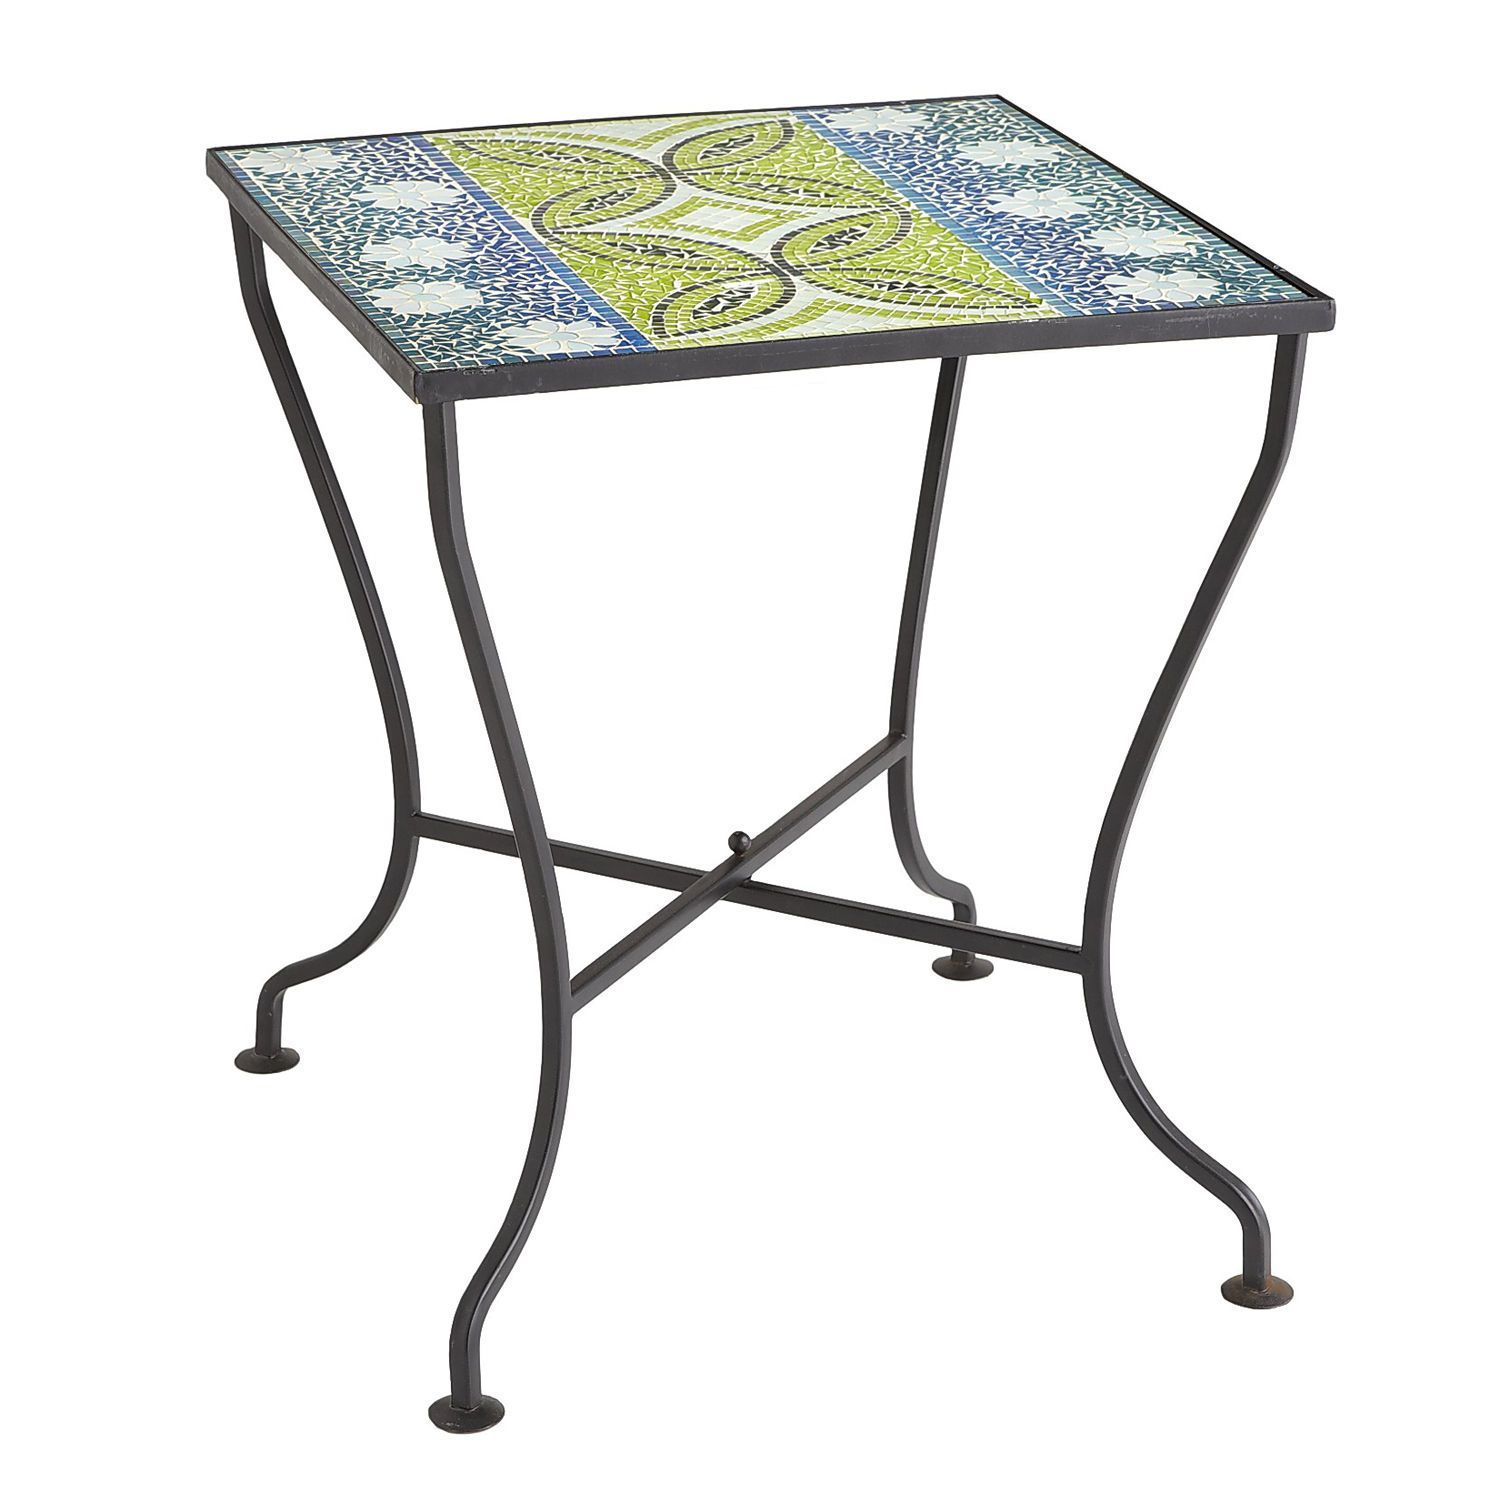 Lani Mosaic Accent Table | Pier 1 Imports | Mosaic Accent Table Throughout Mosaic Outdoor Accent Tables (View 13 of 15)